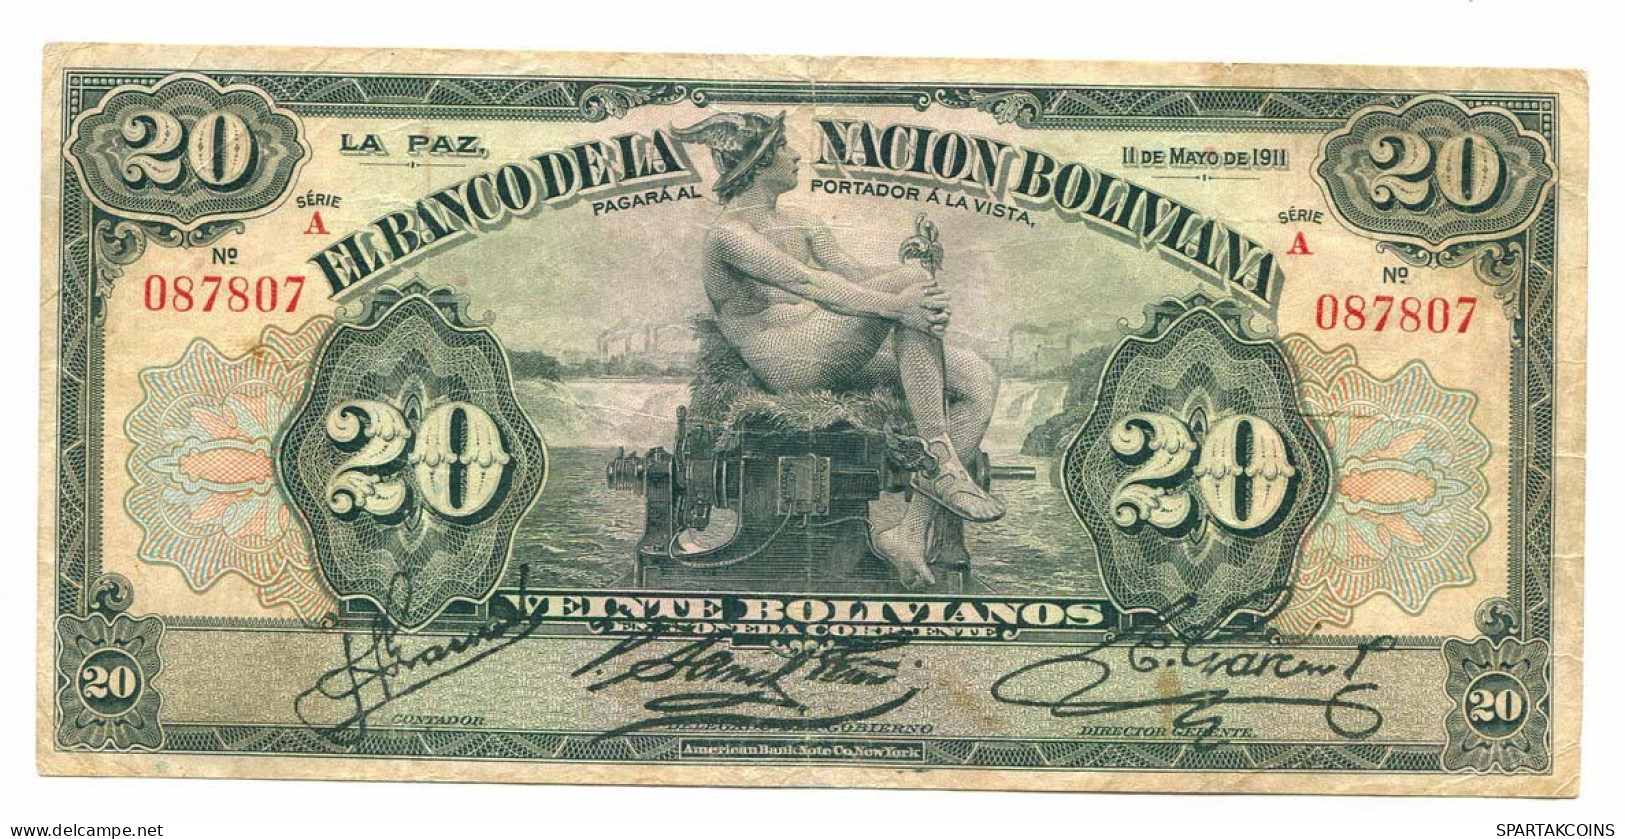 BOLIVIA 20 BOLIVIANOS 1911 SERIE A Paper Money Banknote #P10796.4 - [11] Local Banknote Issues